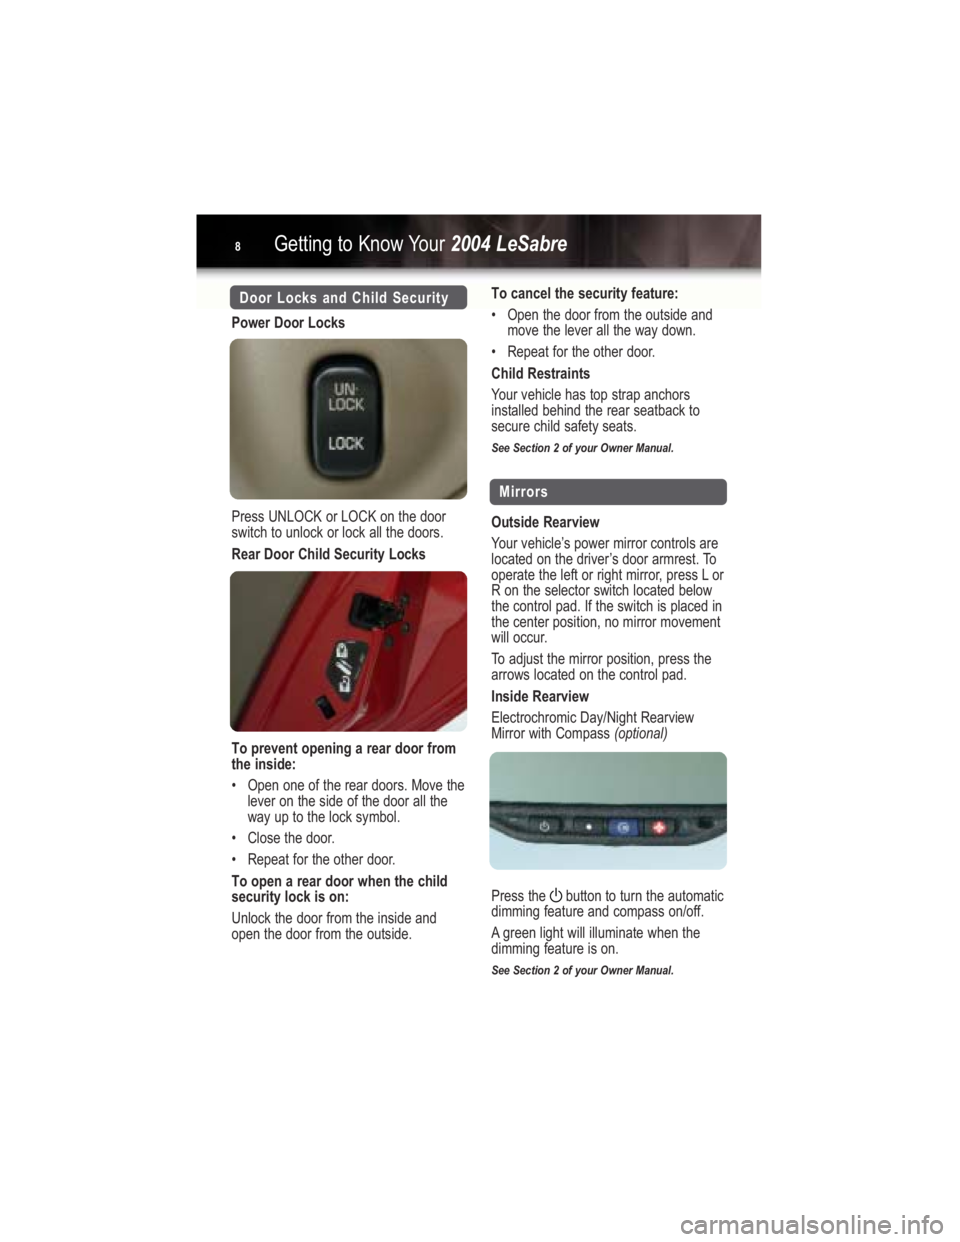 BUICK LESABRE 2004  Get To Know Guide Power Door Locks
Press UNLOCK or LOCK on the door
switch to unlock or lock all the doors.
Rear Door Child Security Locks
To prevent opening a rear door from
the inside:
•Open one of the rear doors. 